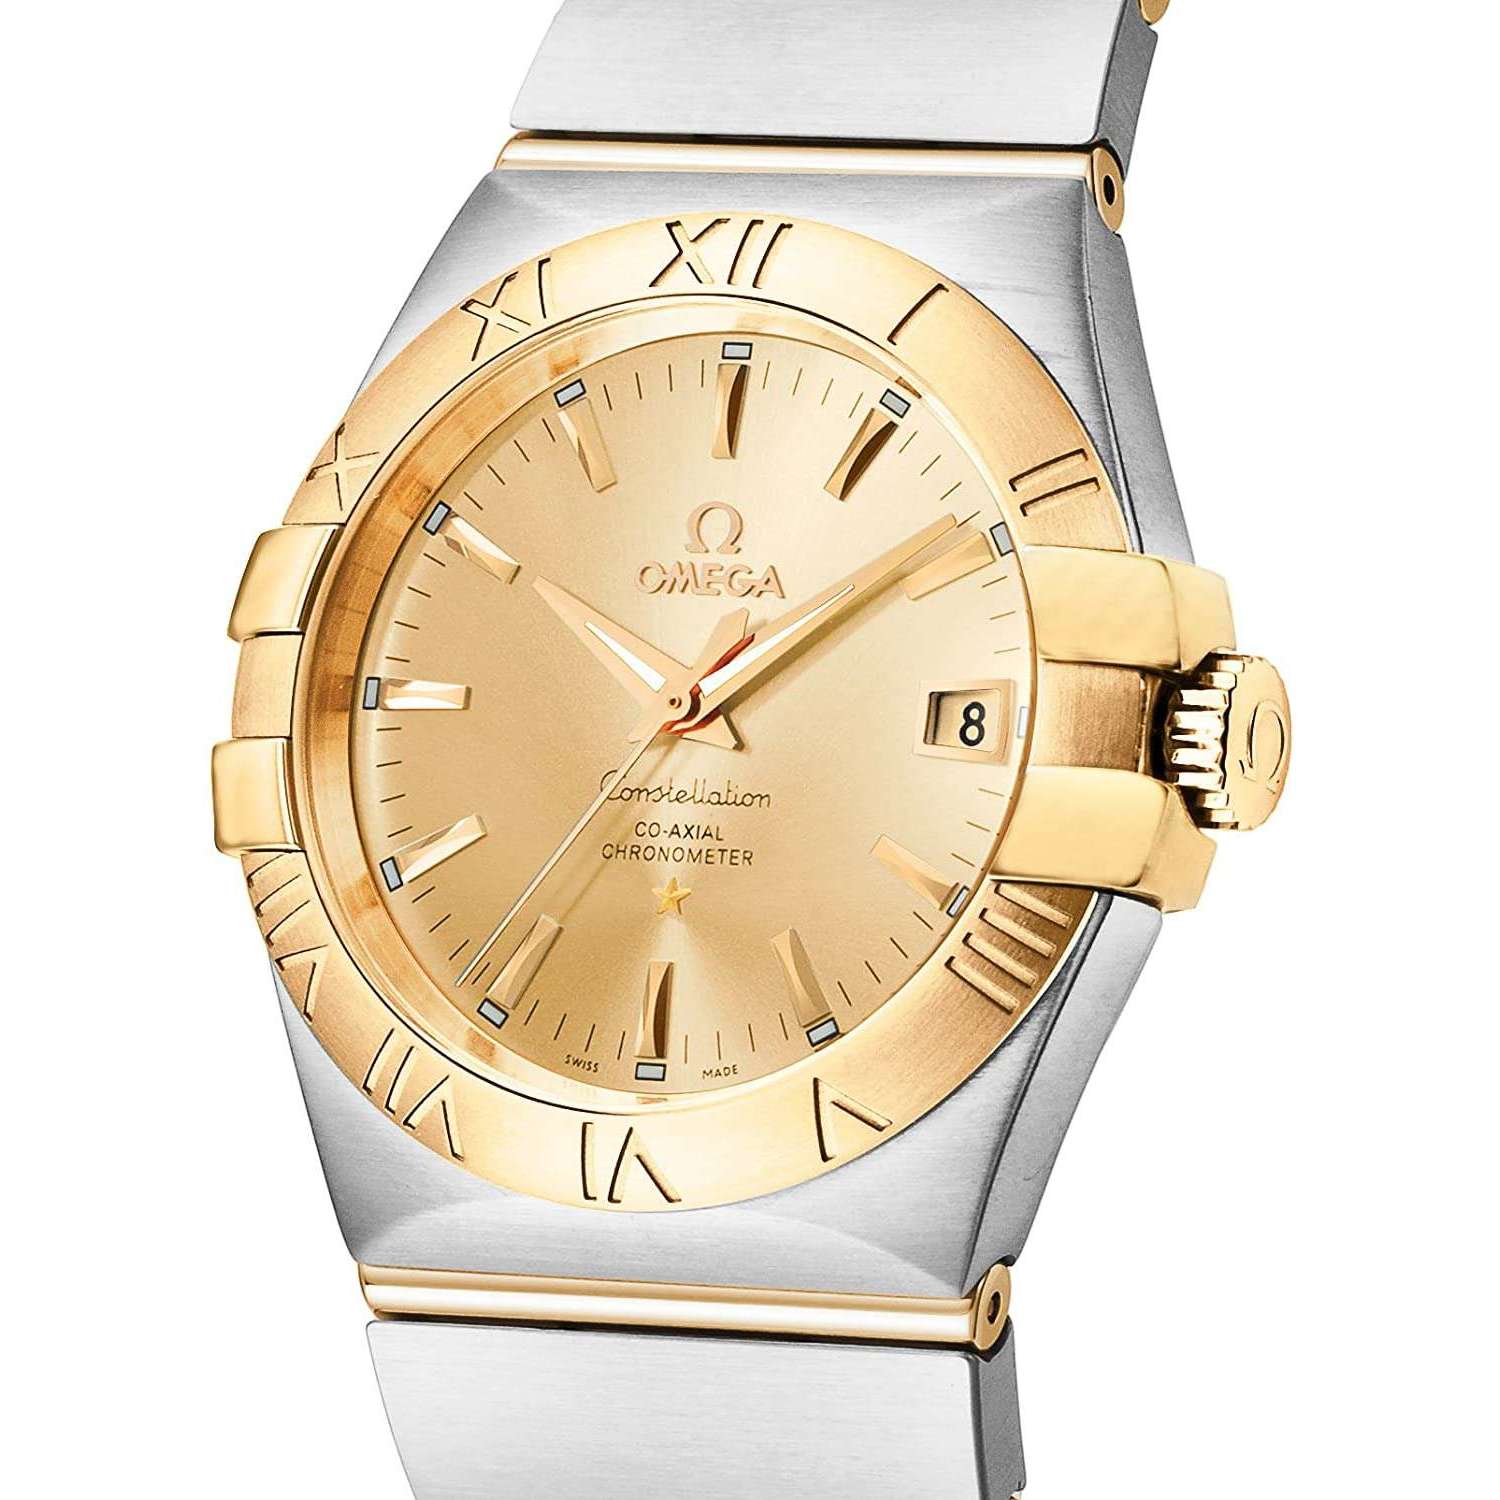 OMEGA CONSTELLATION CO-AXIAL CHRONOMETER 35 MM MEN WATCH 123.20.35.20.08.001 - ROOK JAPAN